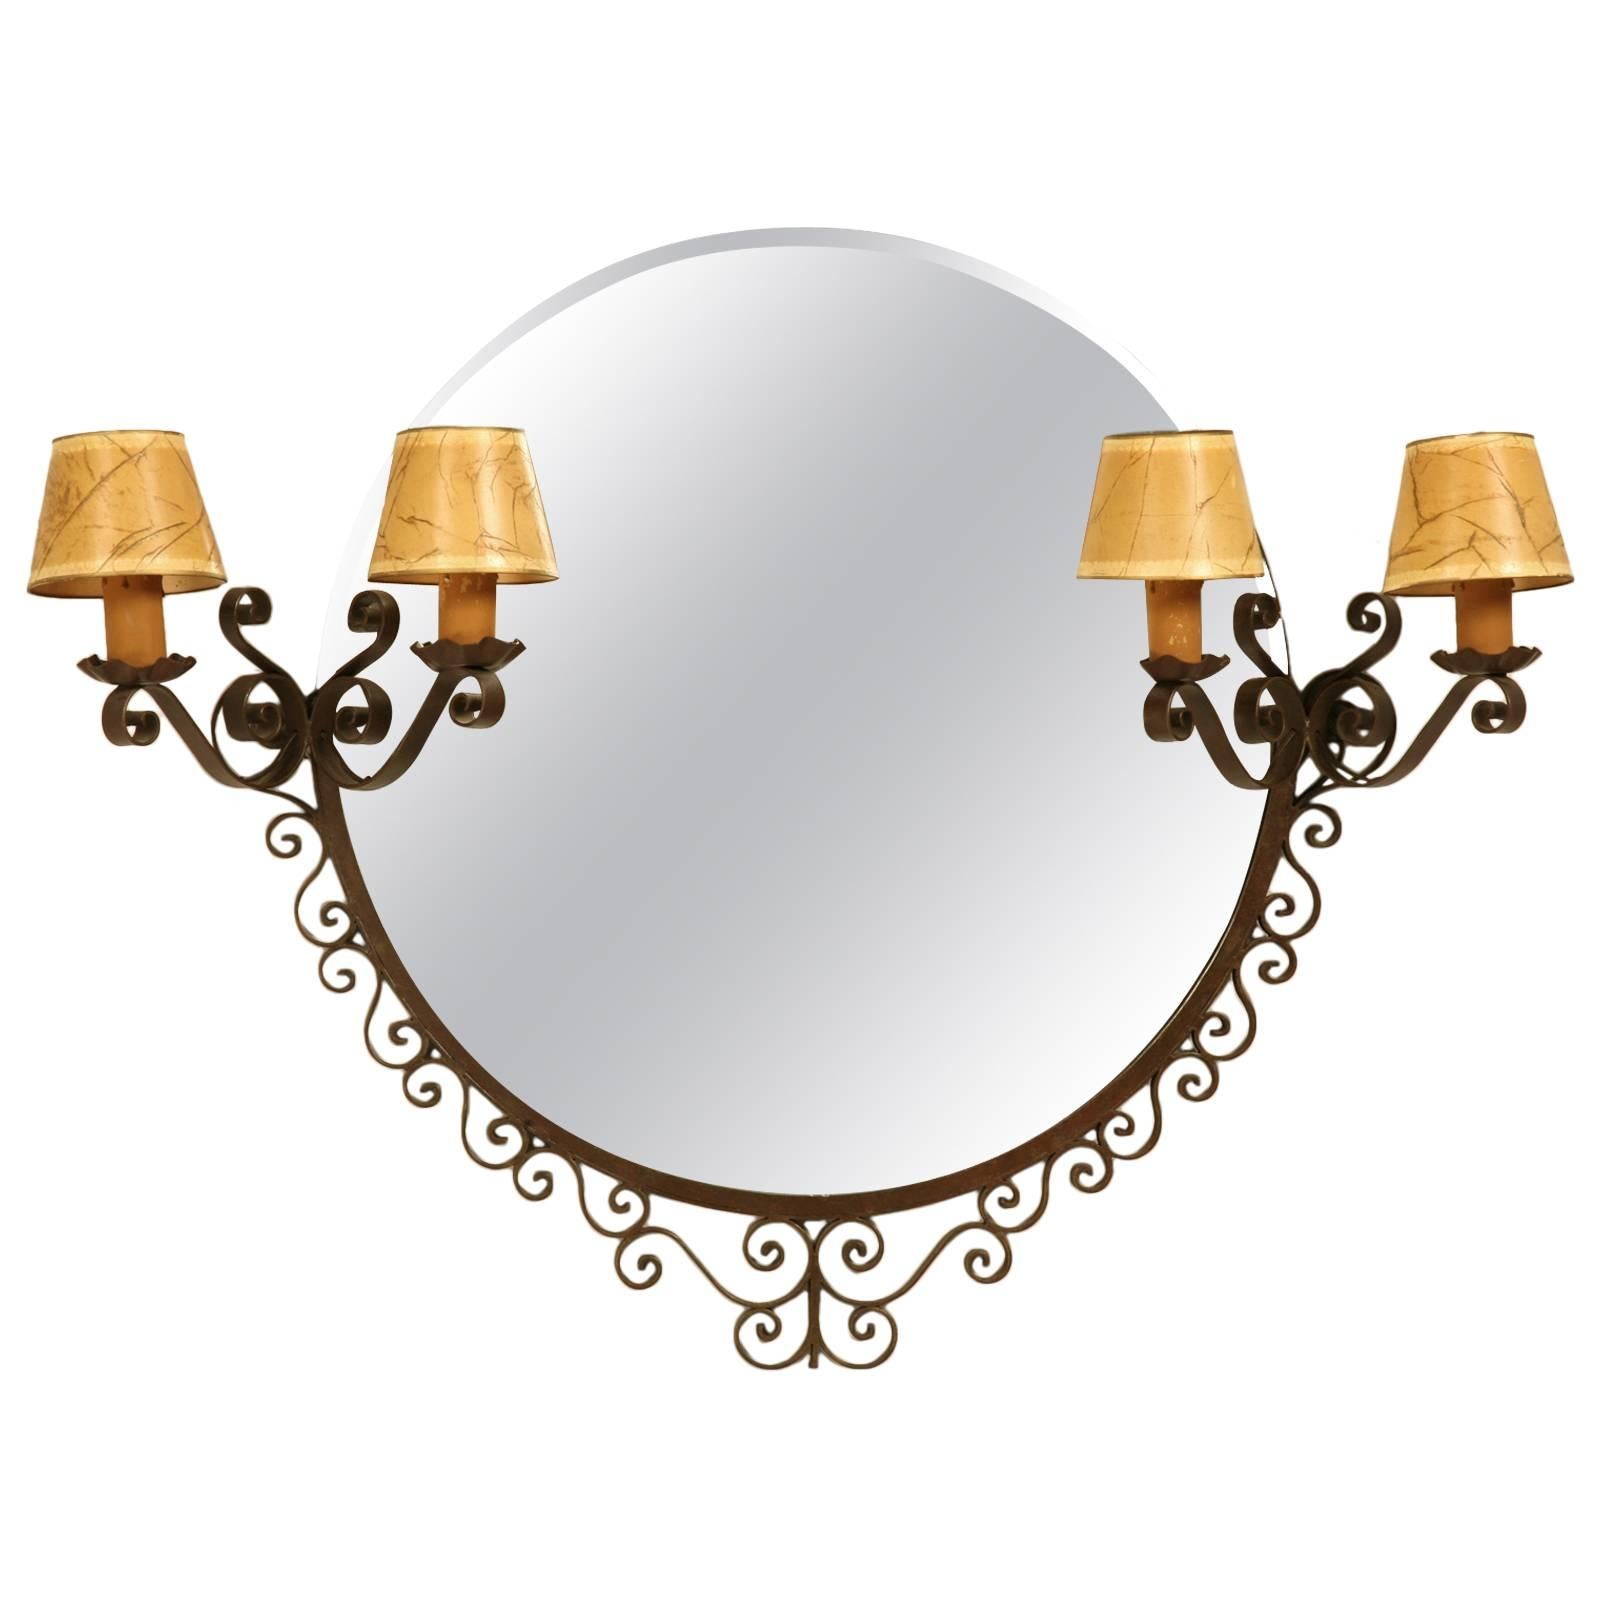 French Art Deco Round Mirror with Built-in Sconces circa 1930's For Sale